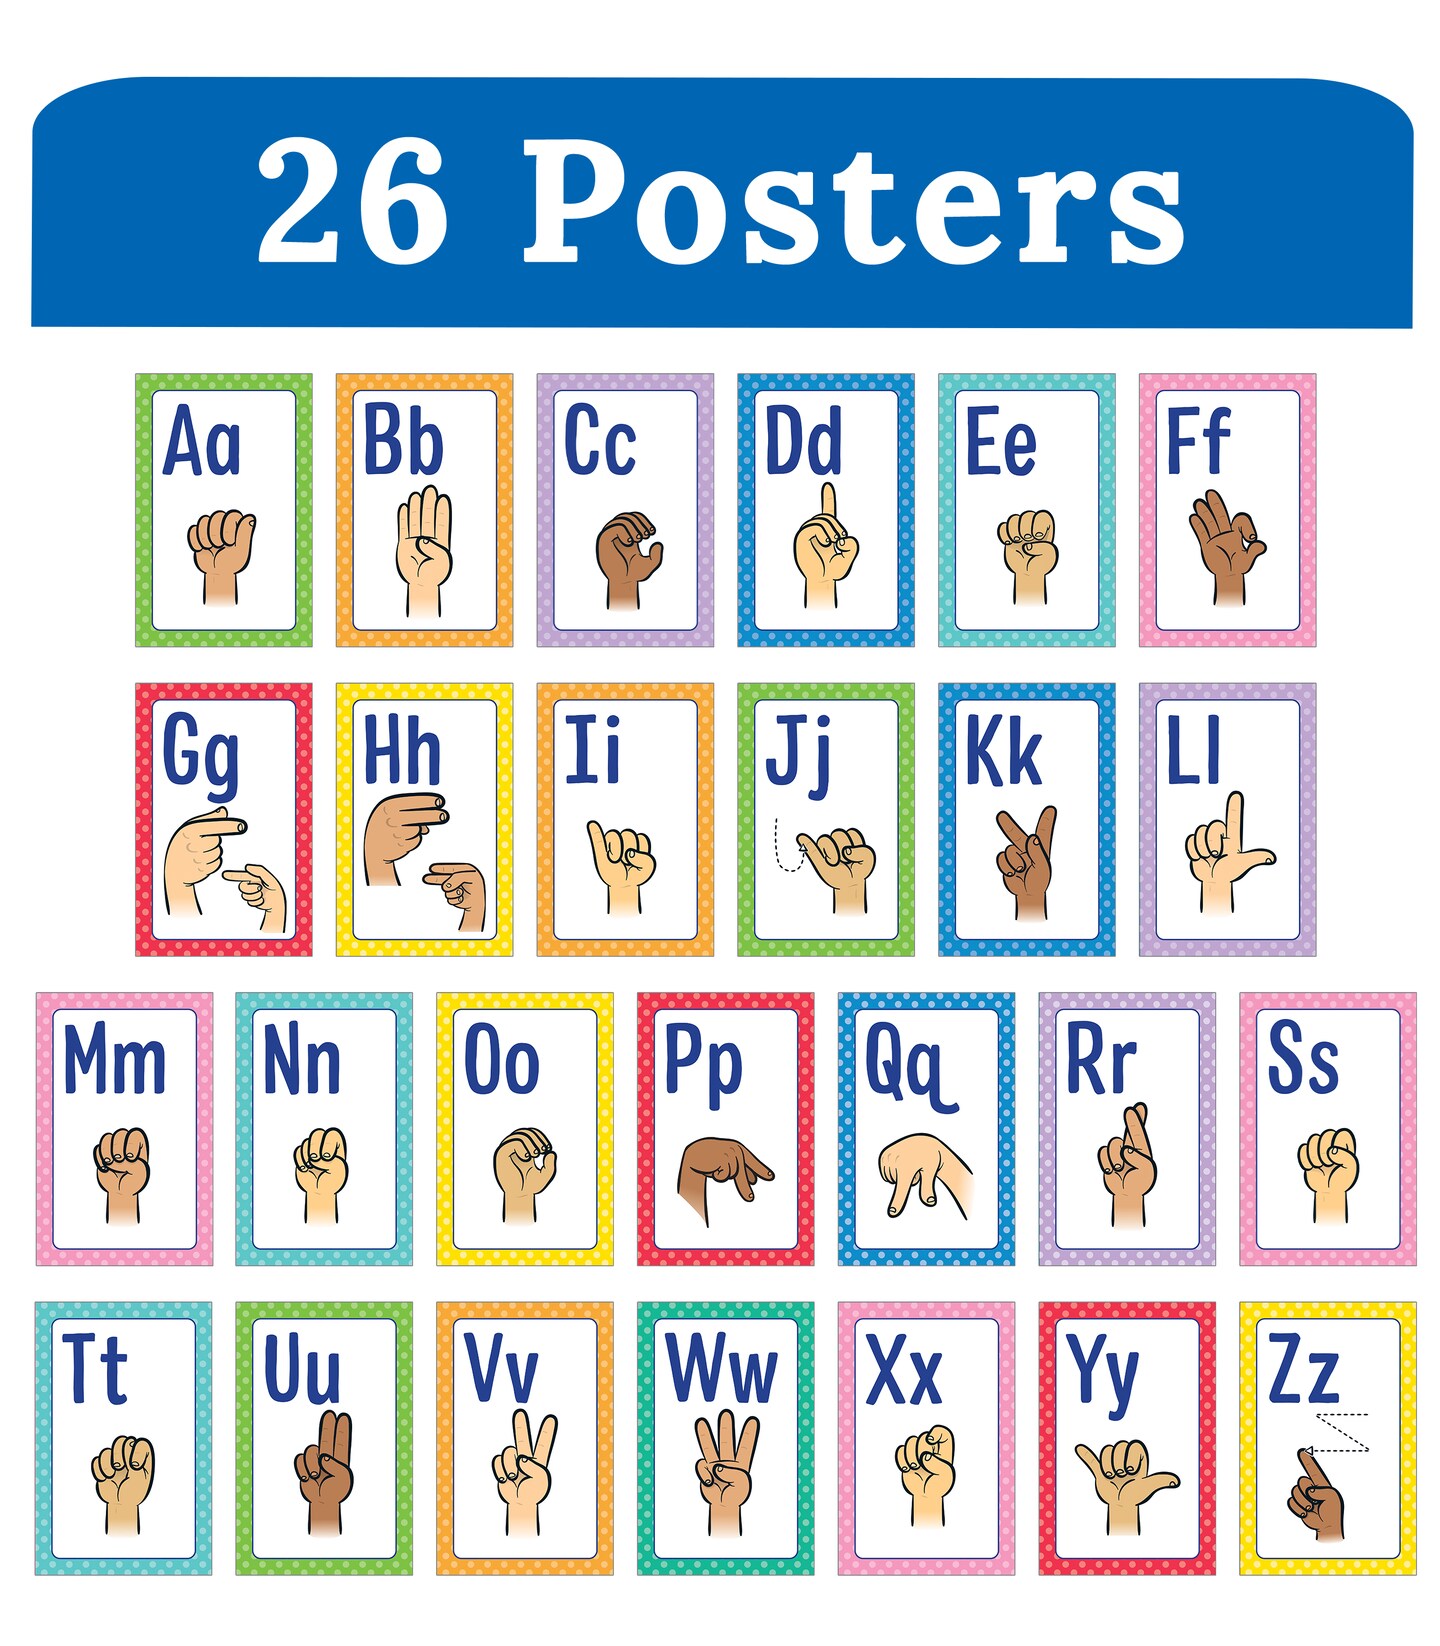 Carson Dellosa Sign Language Posters, ASL Alphabet Learning American Sign Language Posters With Hand Signs, Alphabet Cards for Bulletin Board, Classroom Decor, Classroom Curriculum (26 Posters)